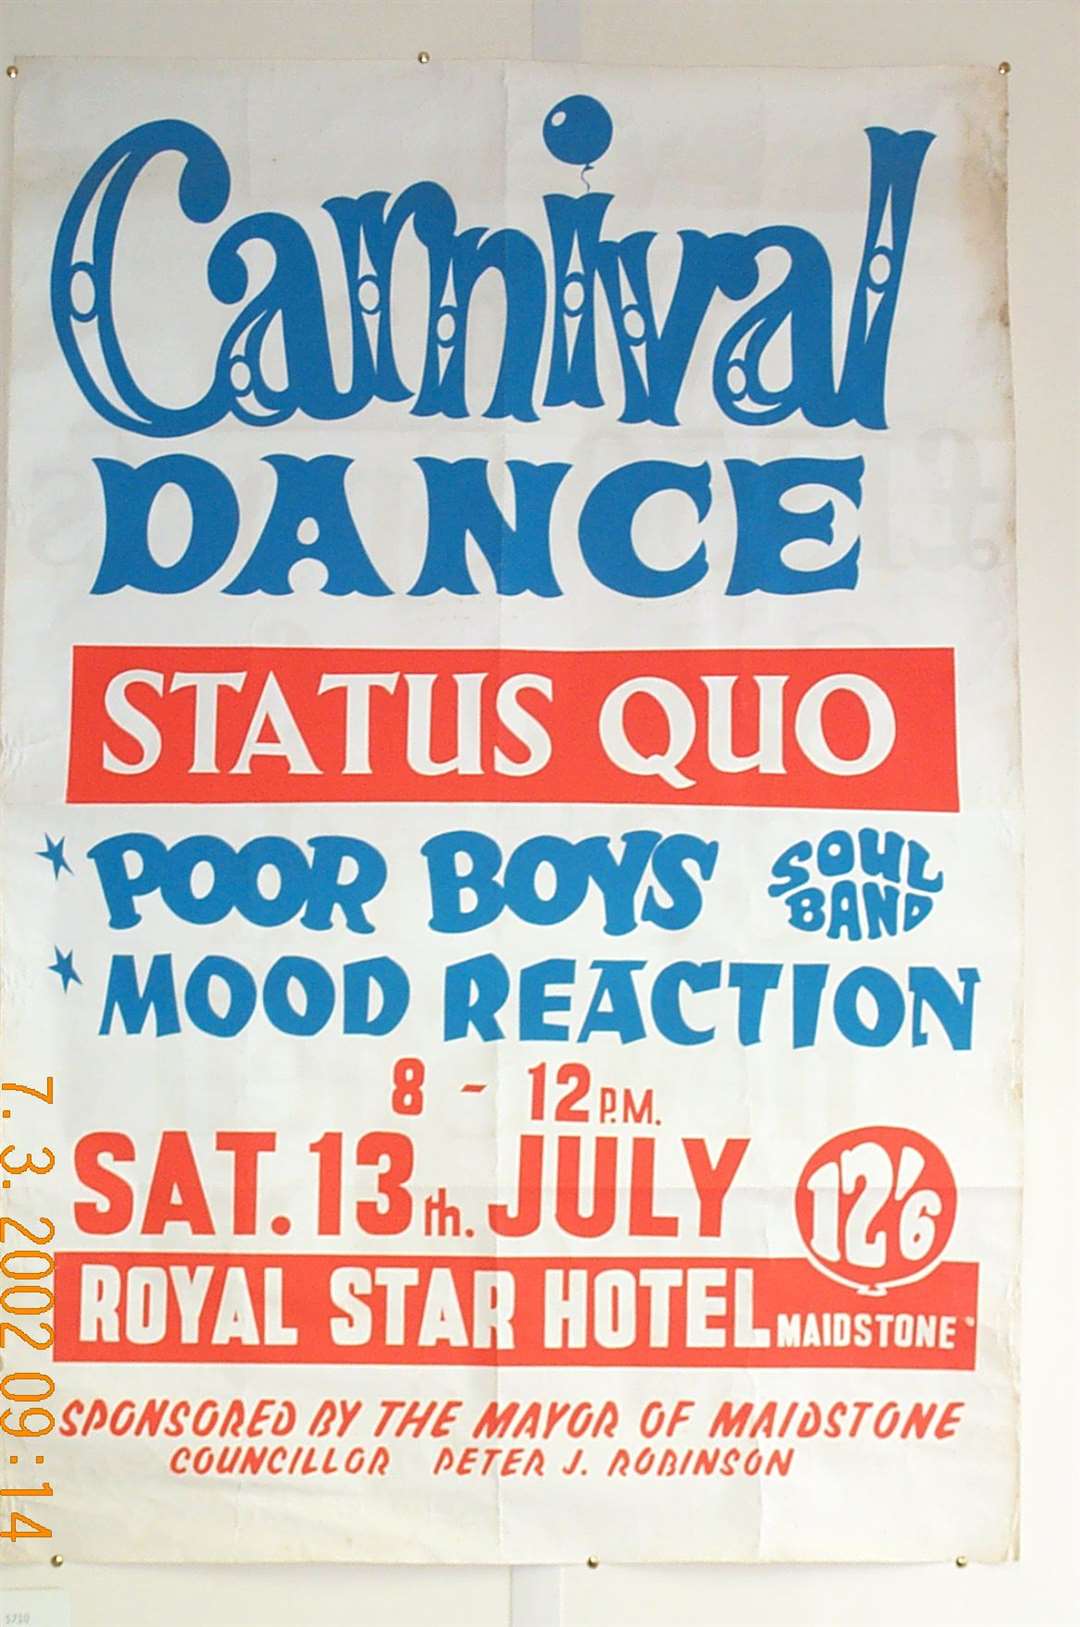 The Poor Boys joined Status Quo for a gig at Maidstone's Royal Star Hotel in 1968